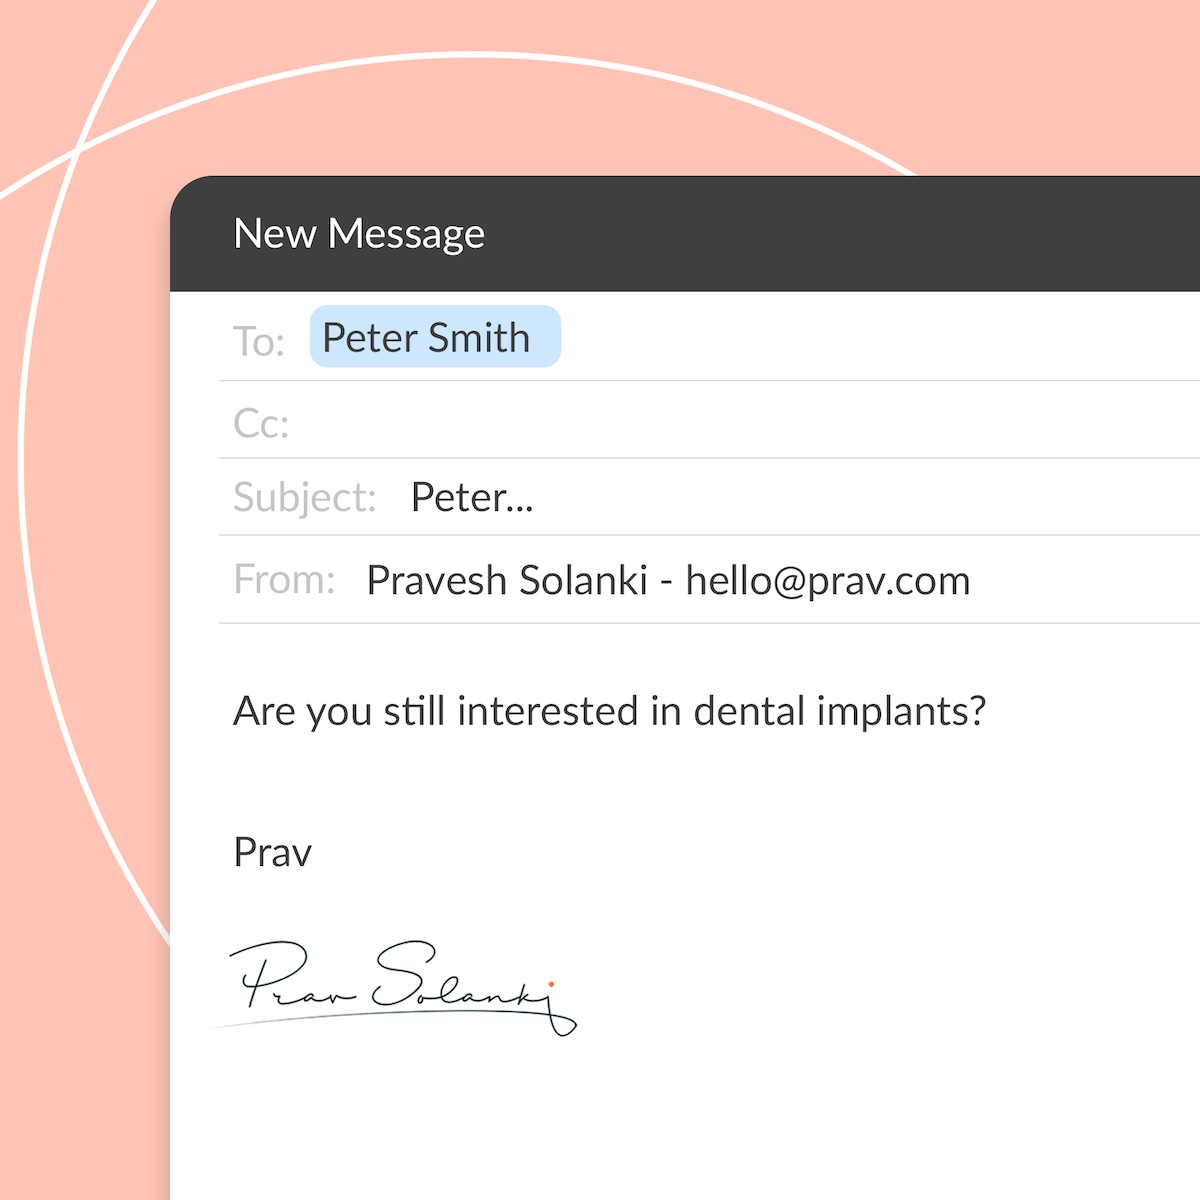 9-word email visual for a dental implant patient. Are you still interested in dental implants?